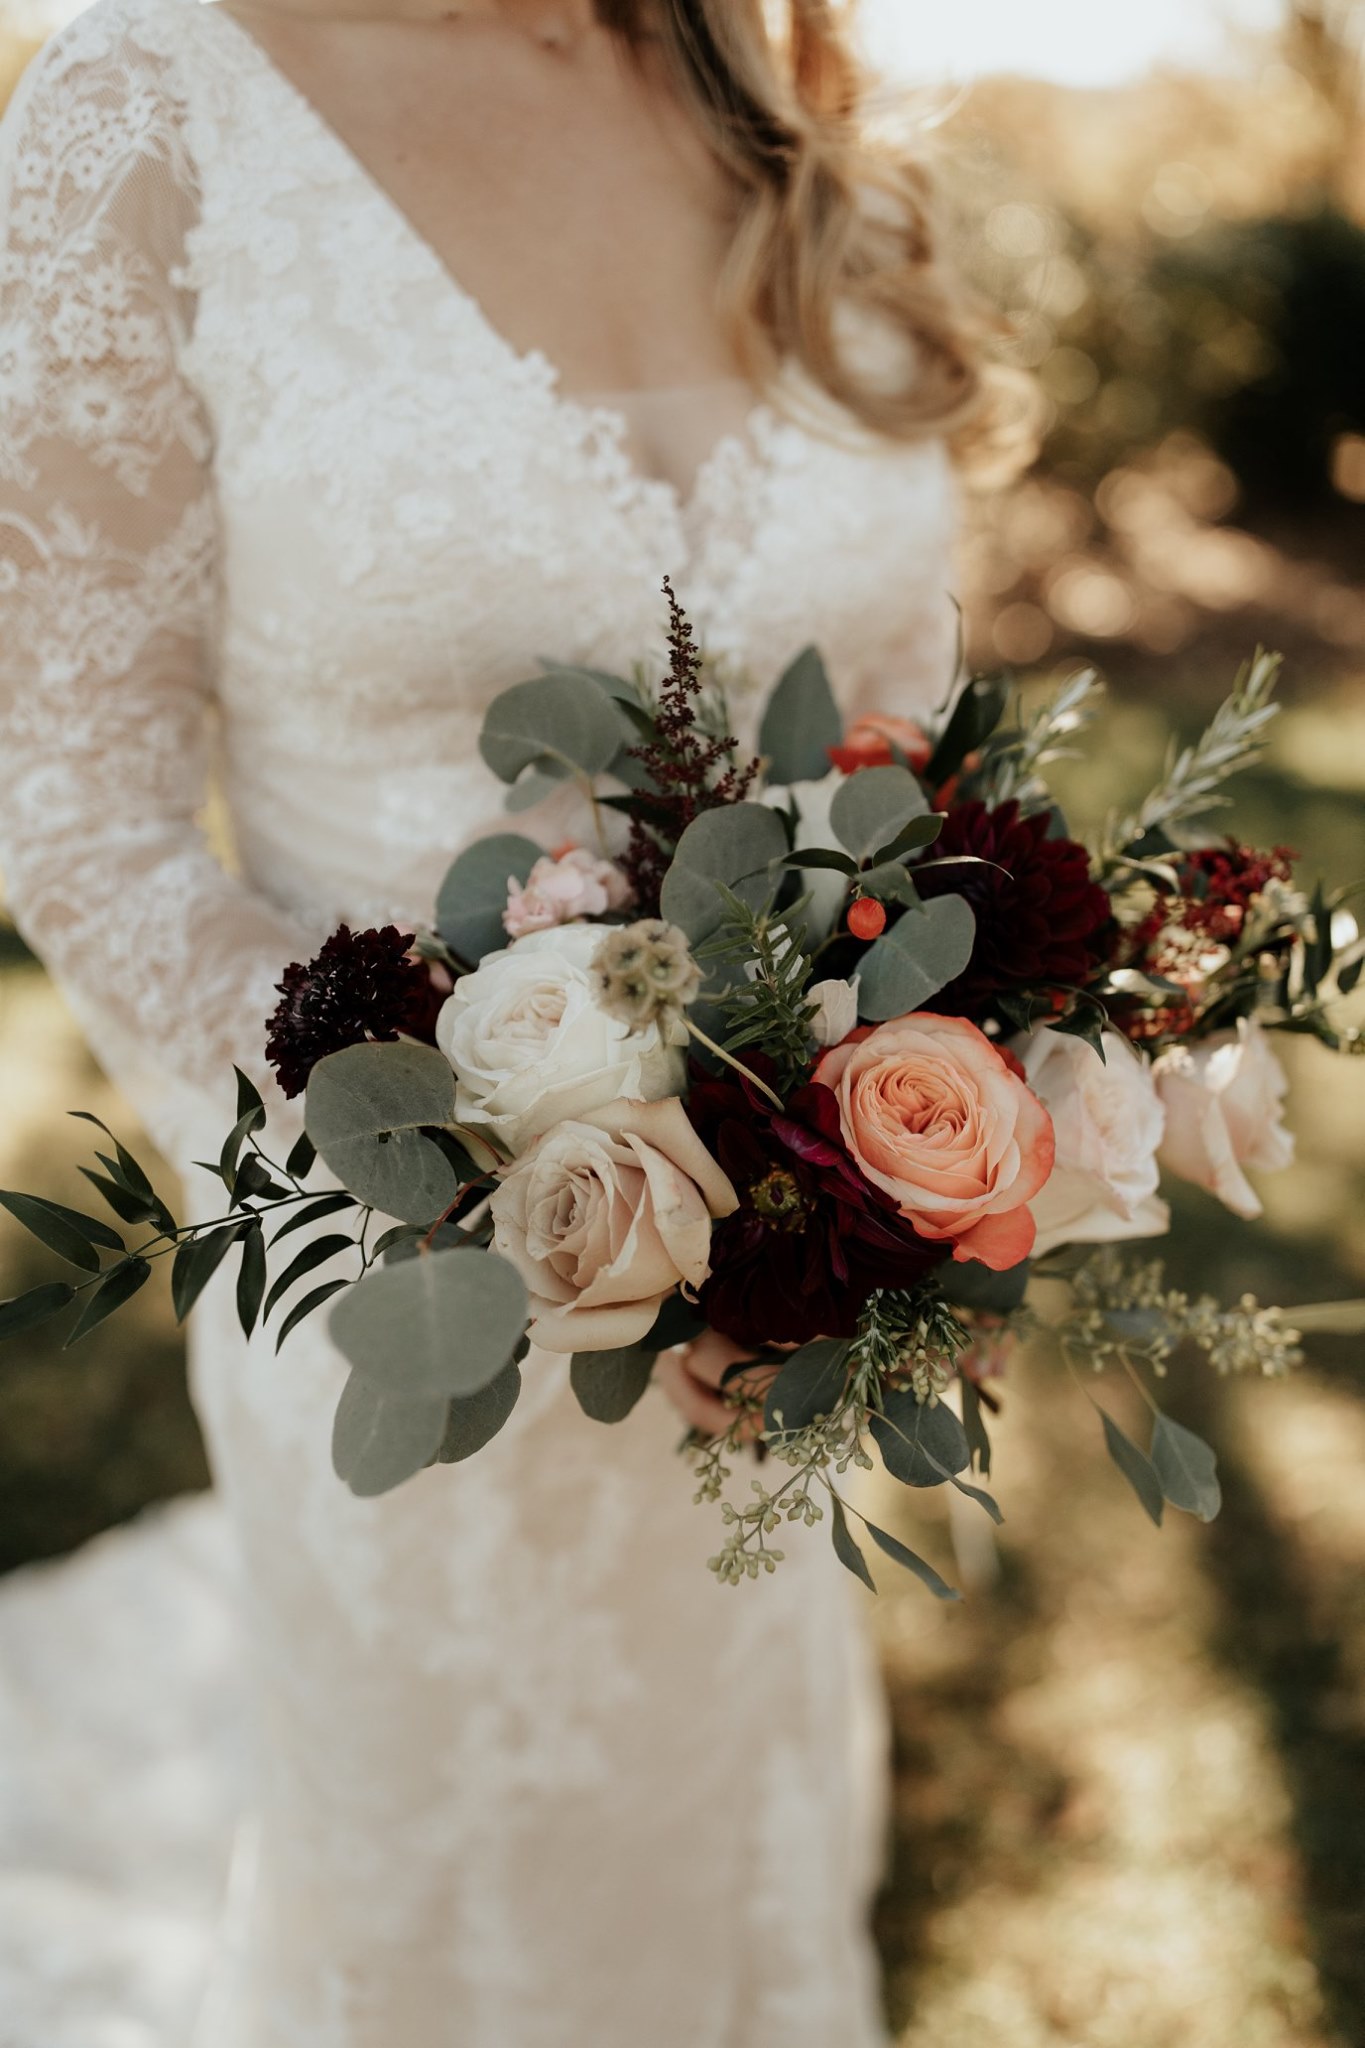 Rustic wedding bouquet: Simply Rustic Front Porch Farms wedding featured on Nashville Bride Guide